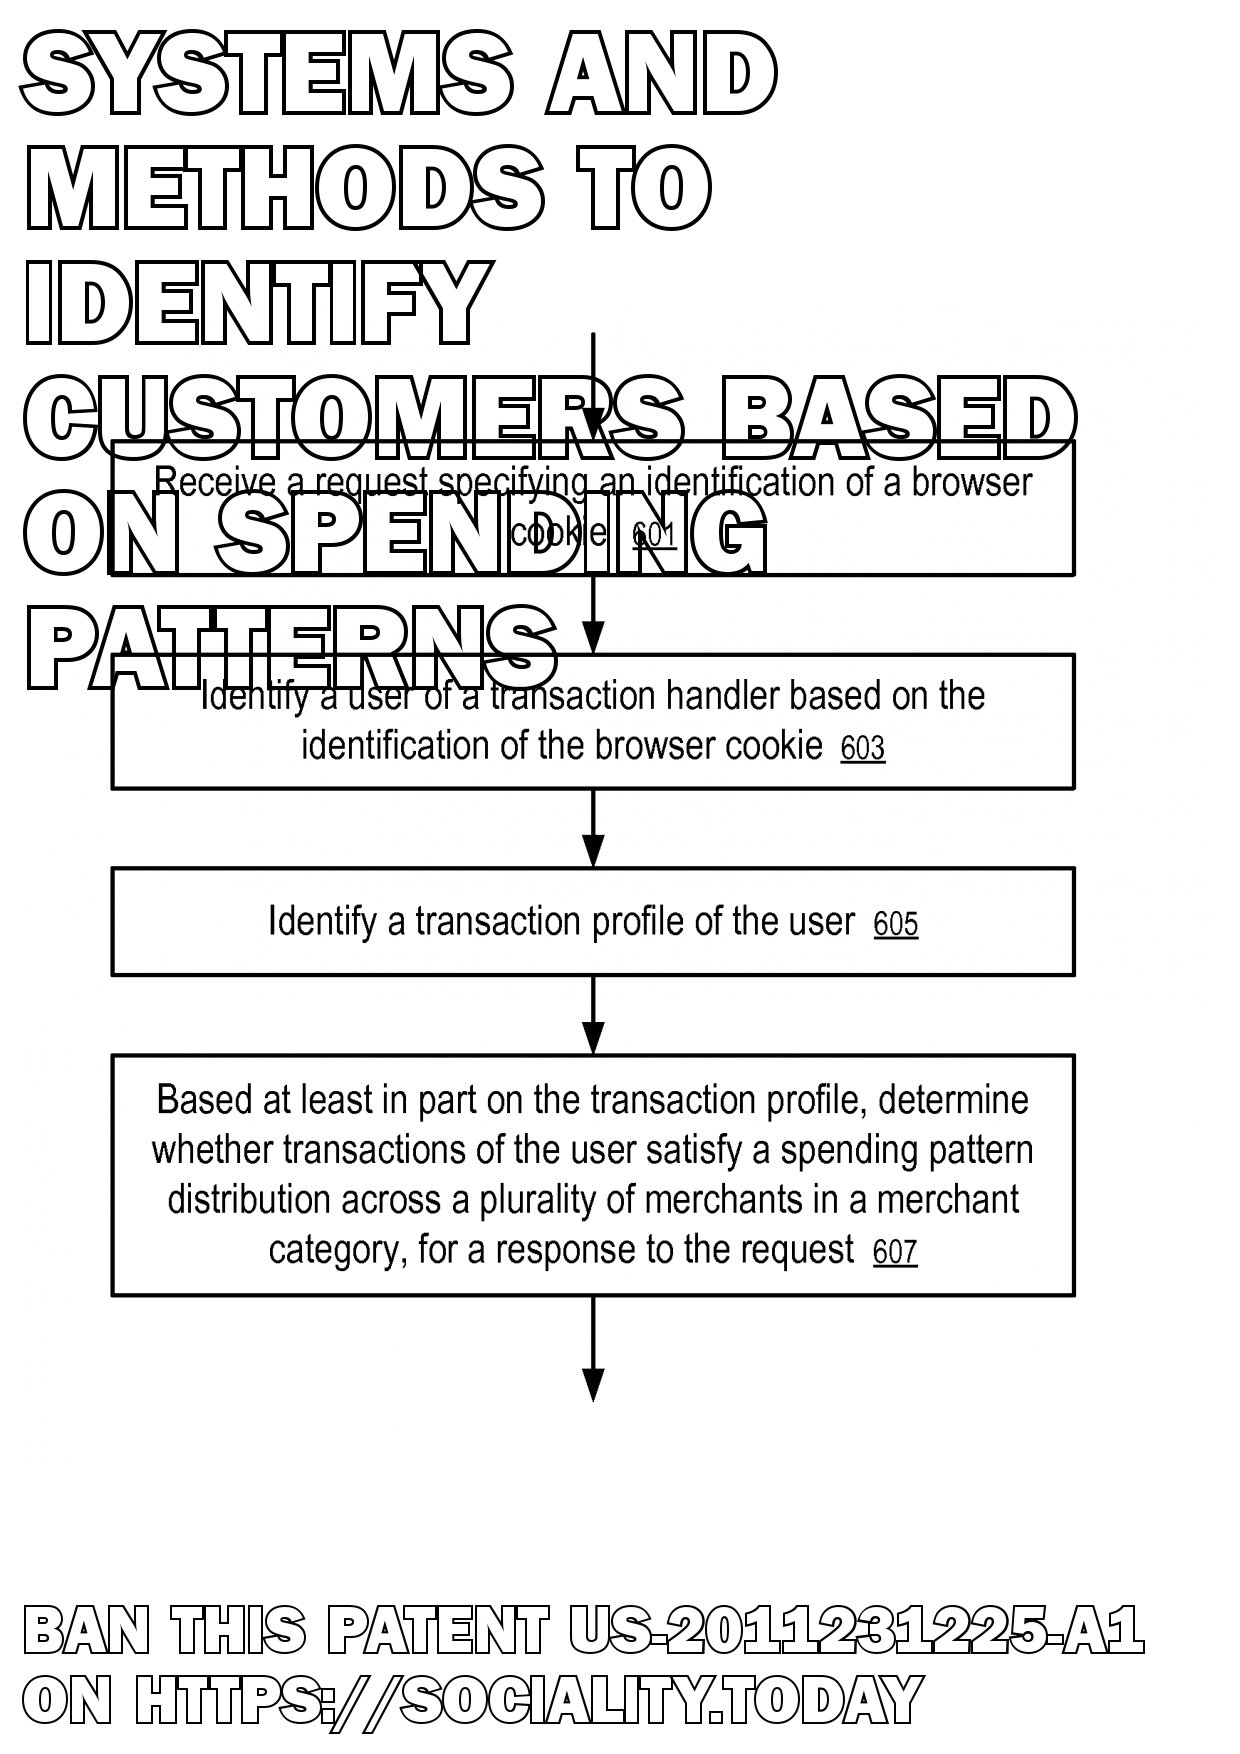 Systems and Methods to Identify Customers Based on Spending Patterns  - US-2011231225-A1